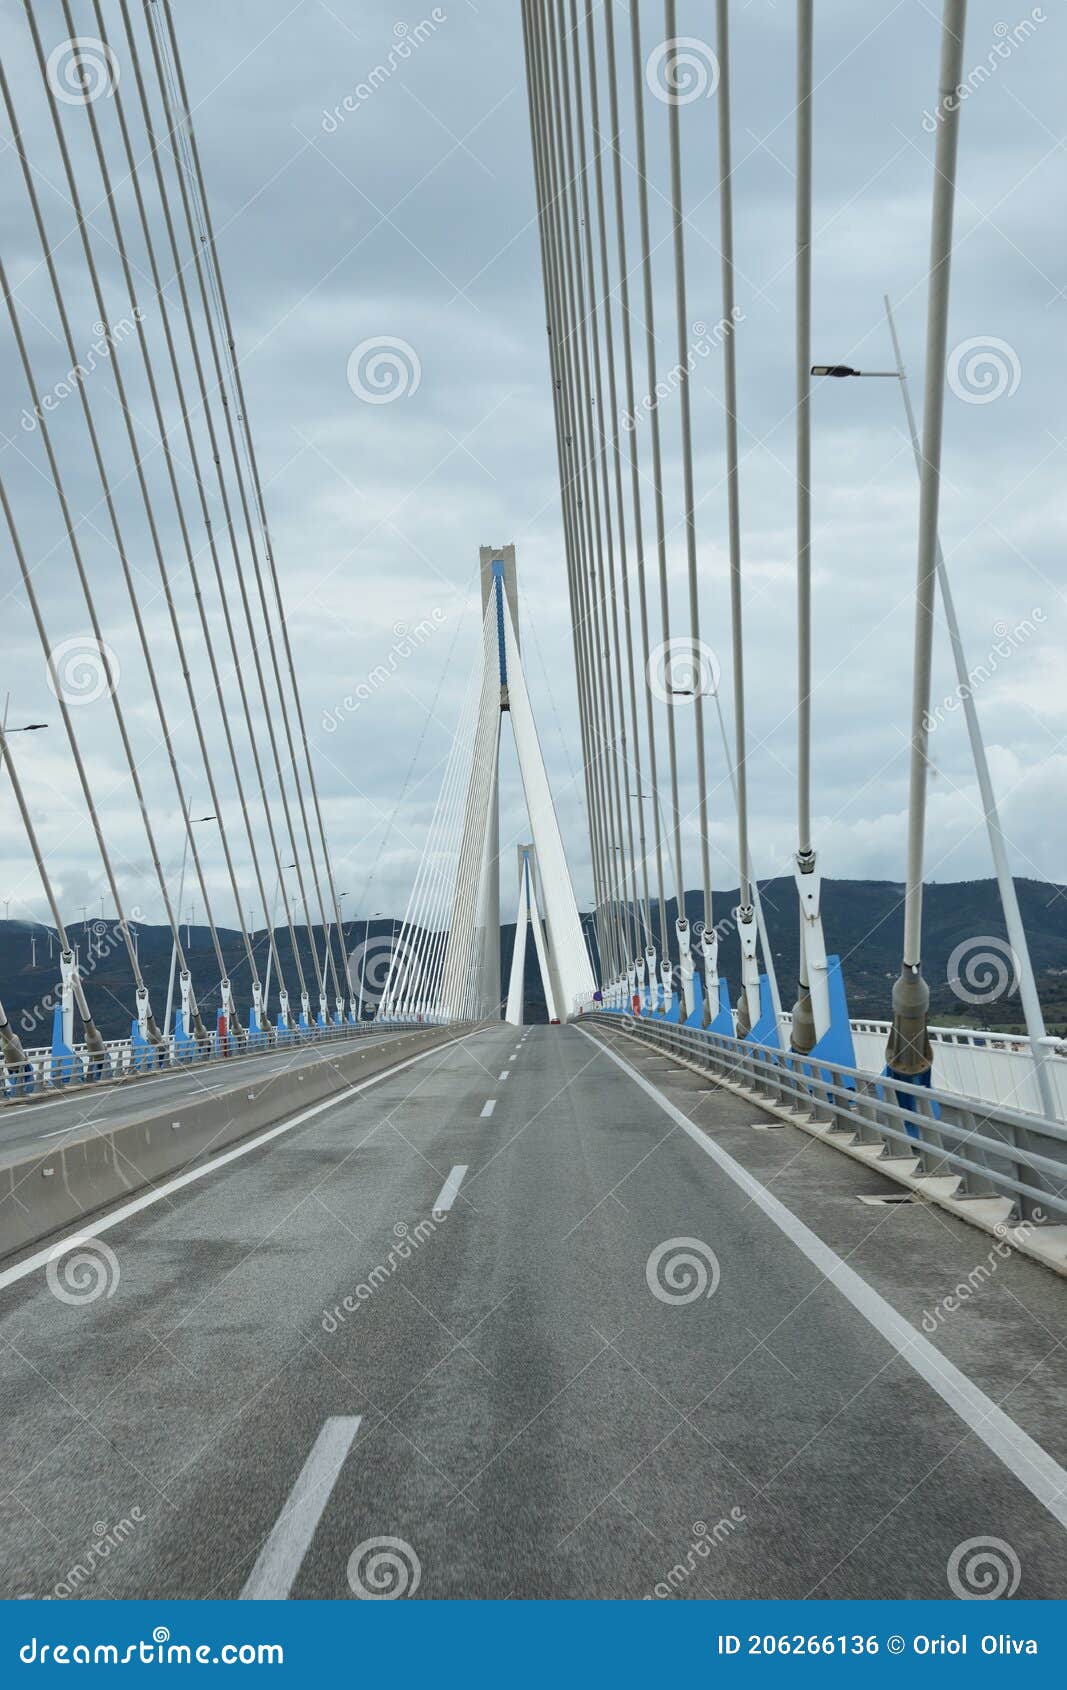 view of the main monuments and sites of greece. rio-antirio bridge